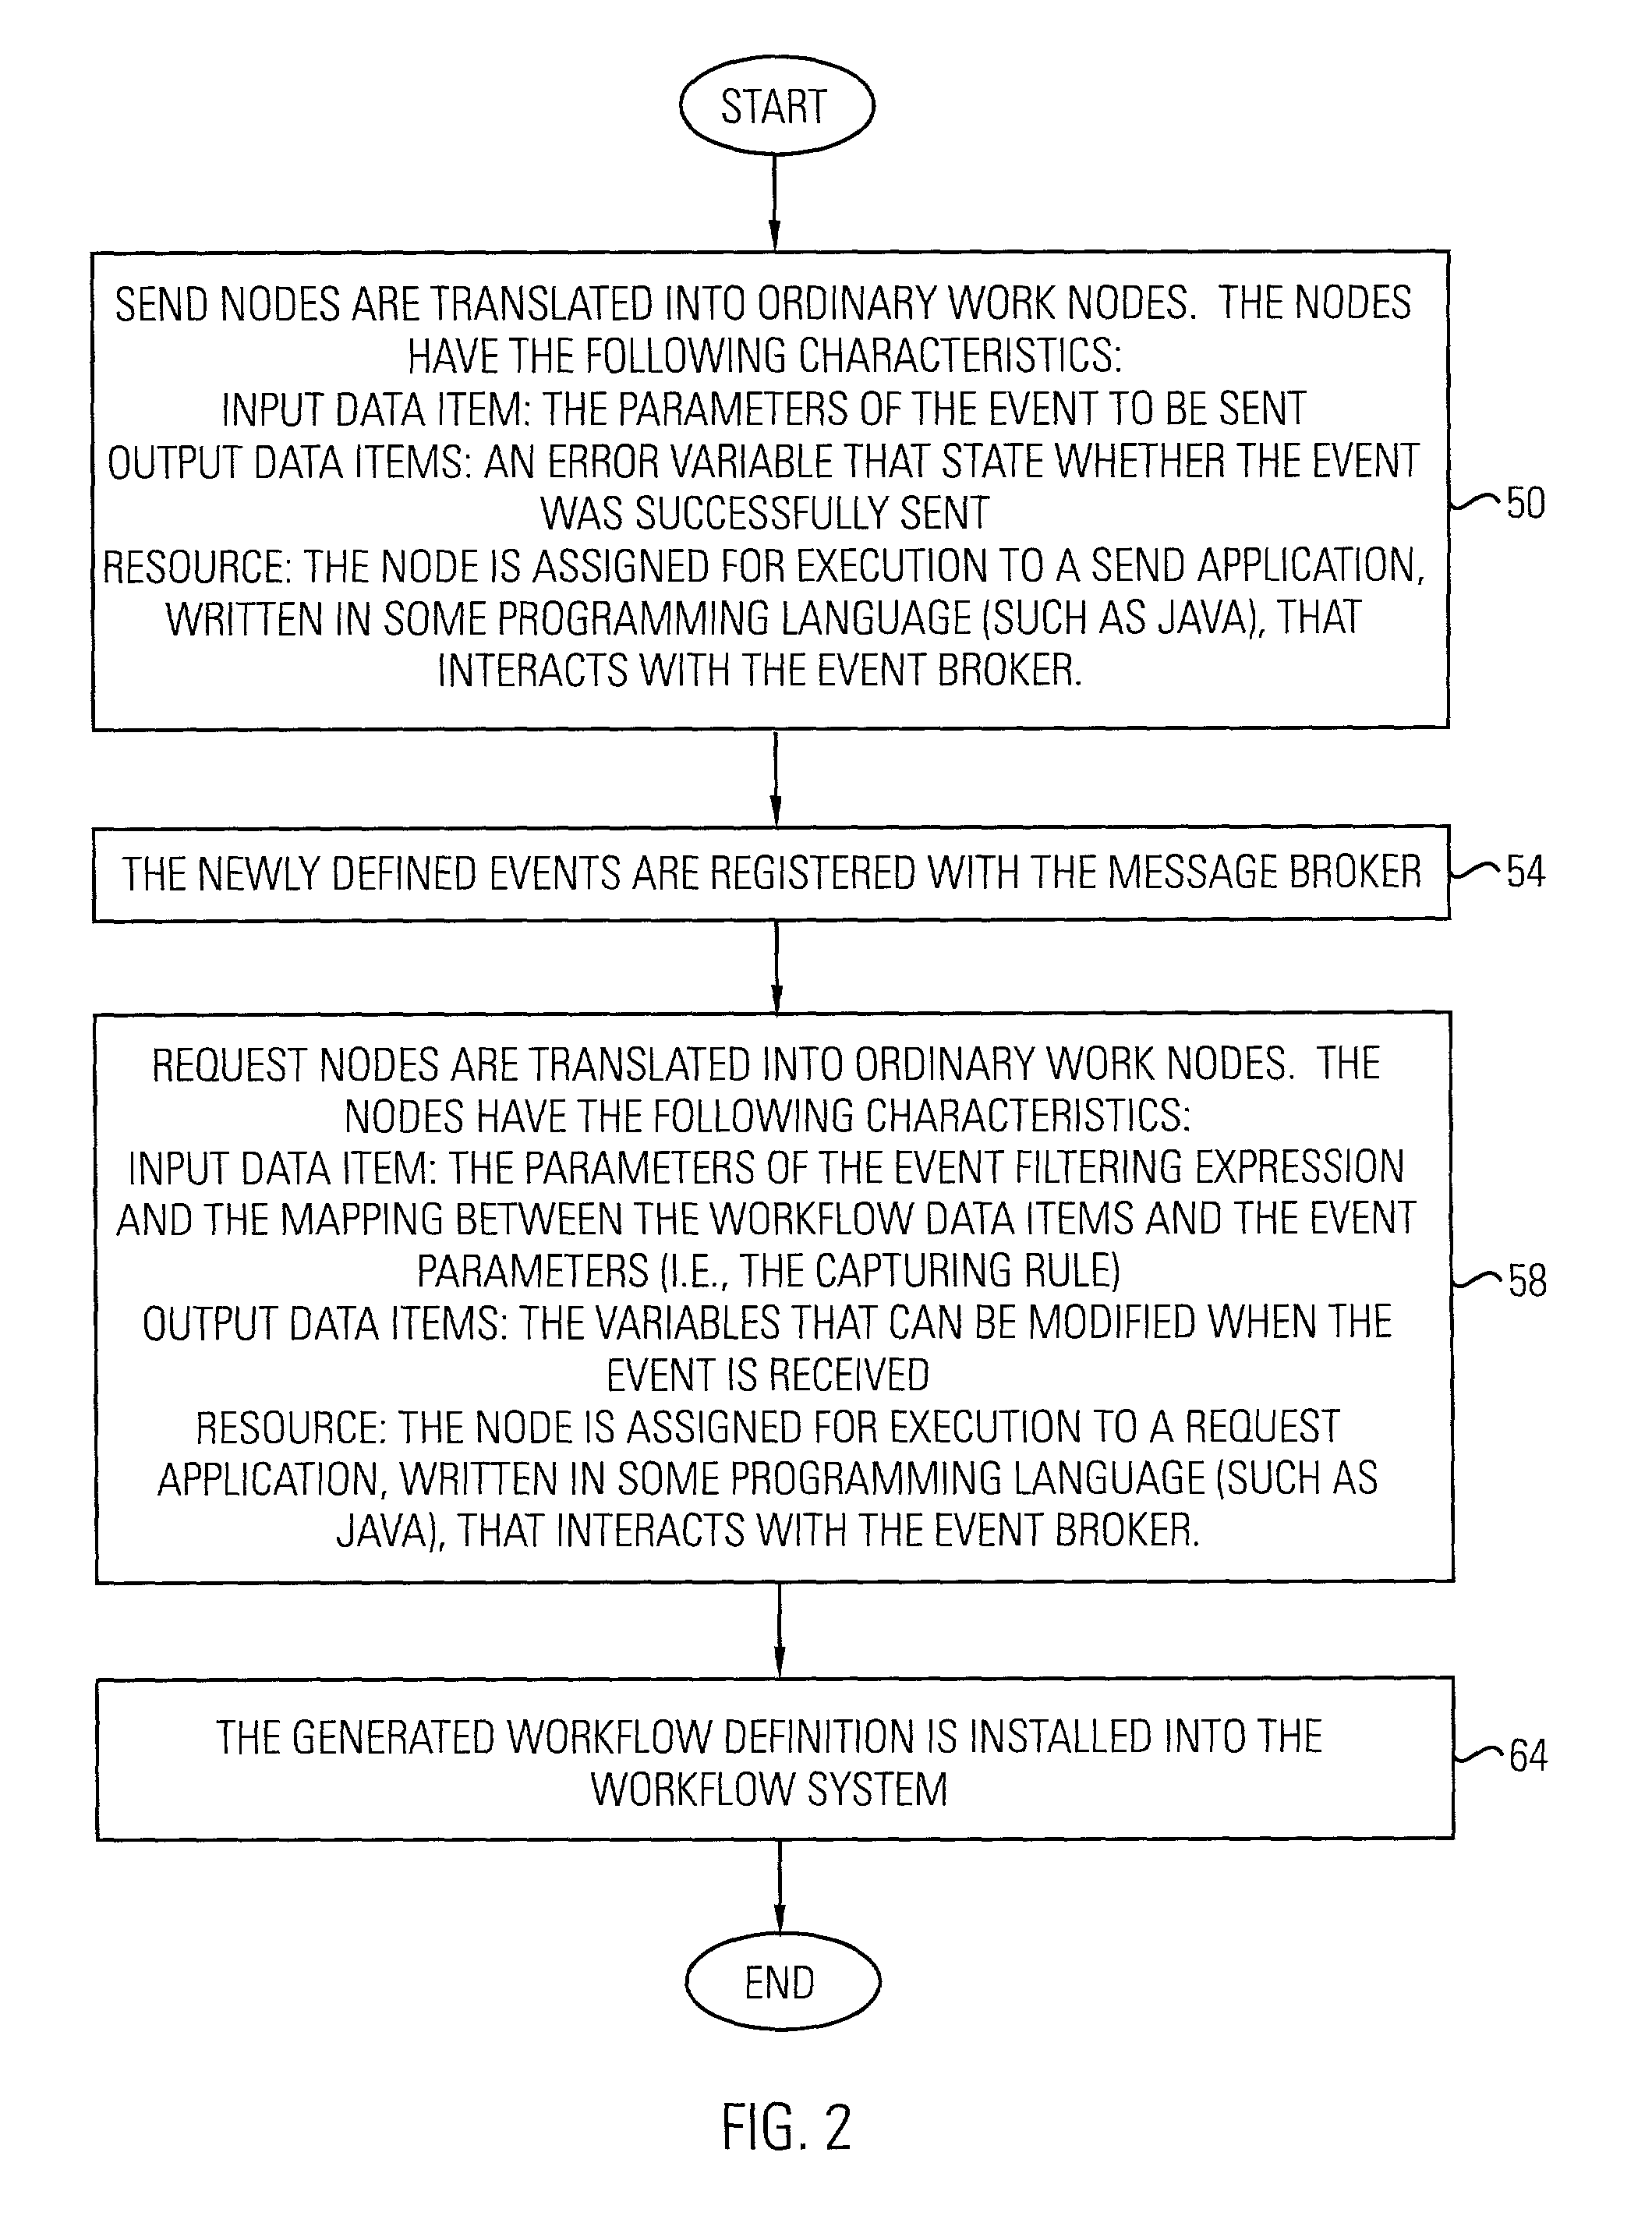 Event-based scheduling method and system for workflow activities